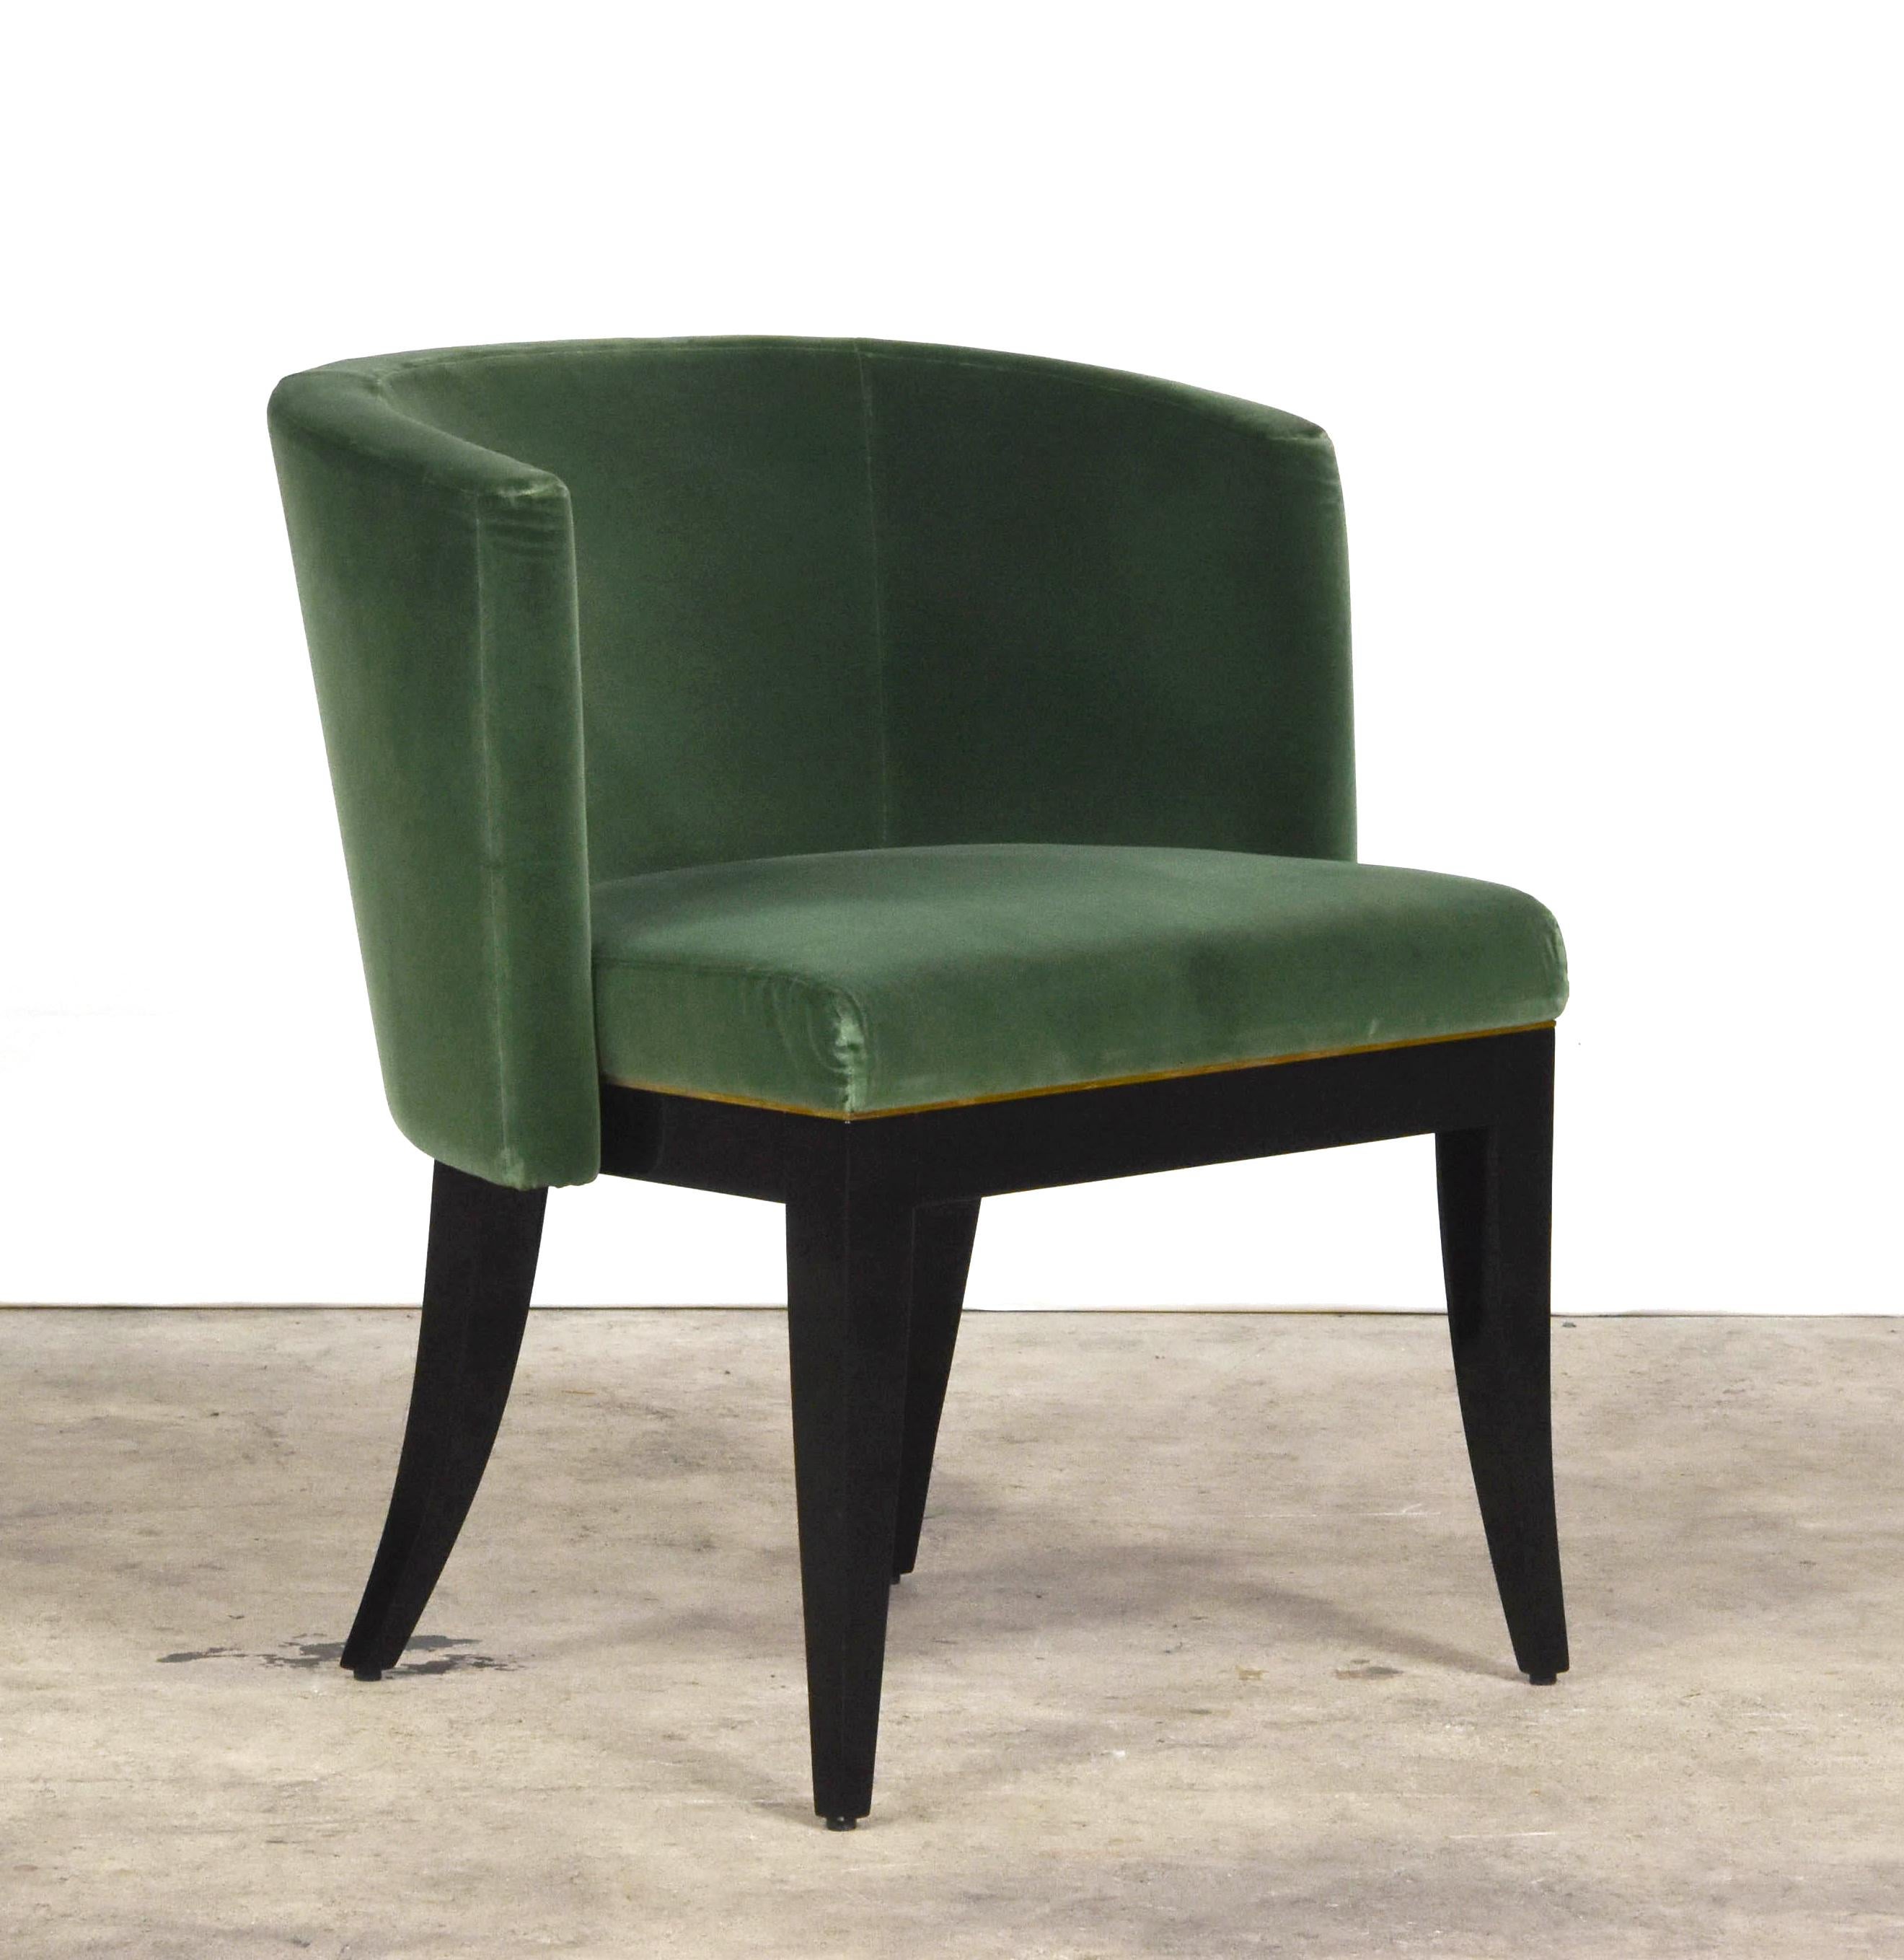 Ideal in lounge and dining contexts, the emerald chair offers a slim Silhouette softly
sketched out. The enveloping seat back embraces the structure, becoming a defining element,
as is the metal accent between the base and the seat. Available in